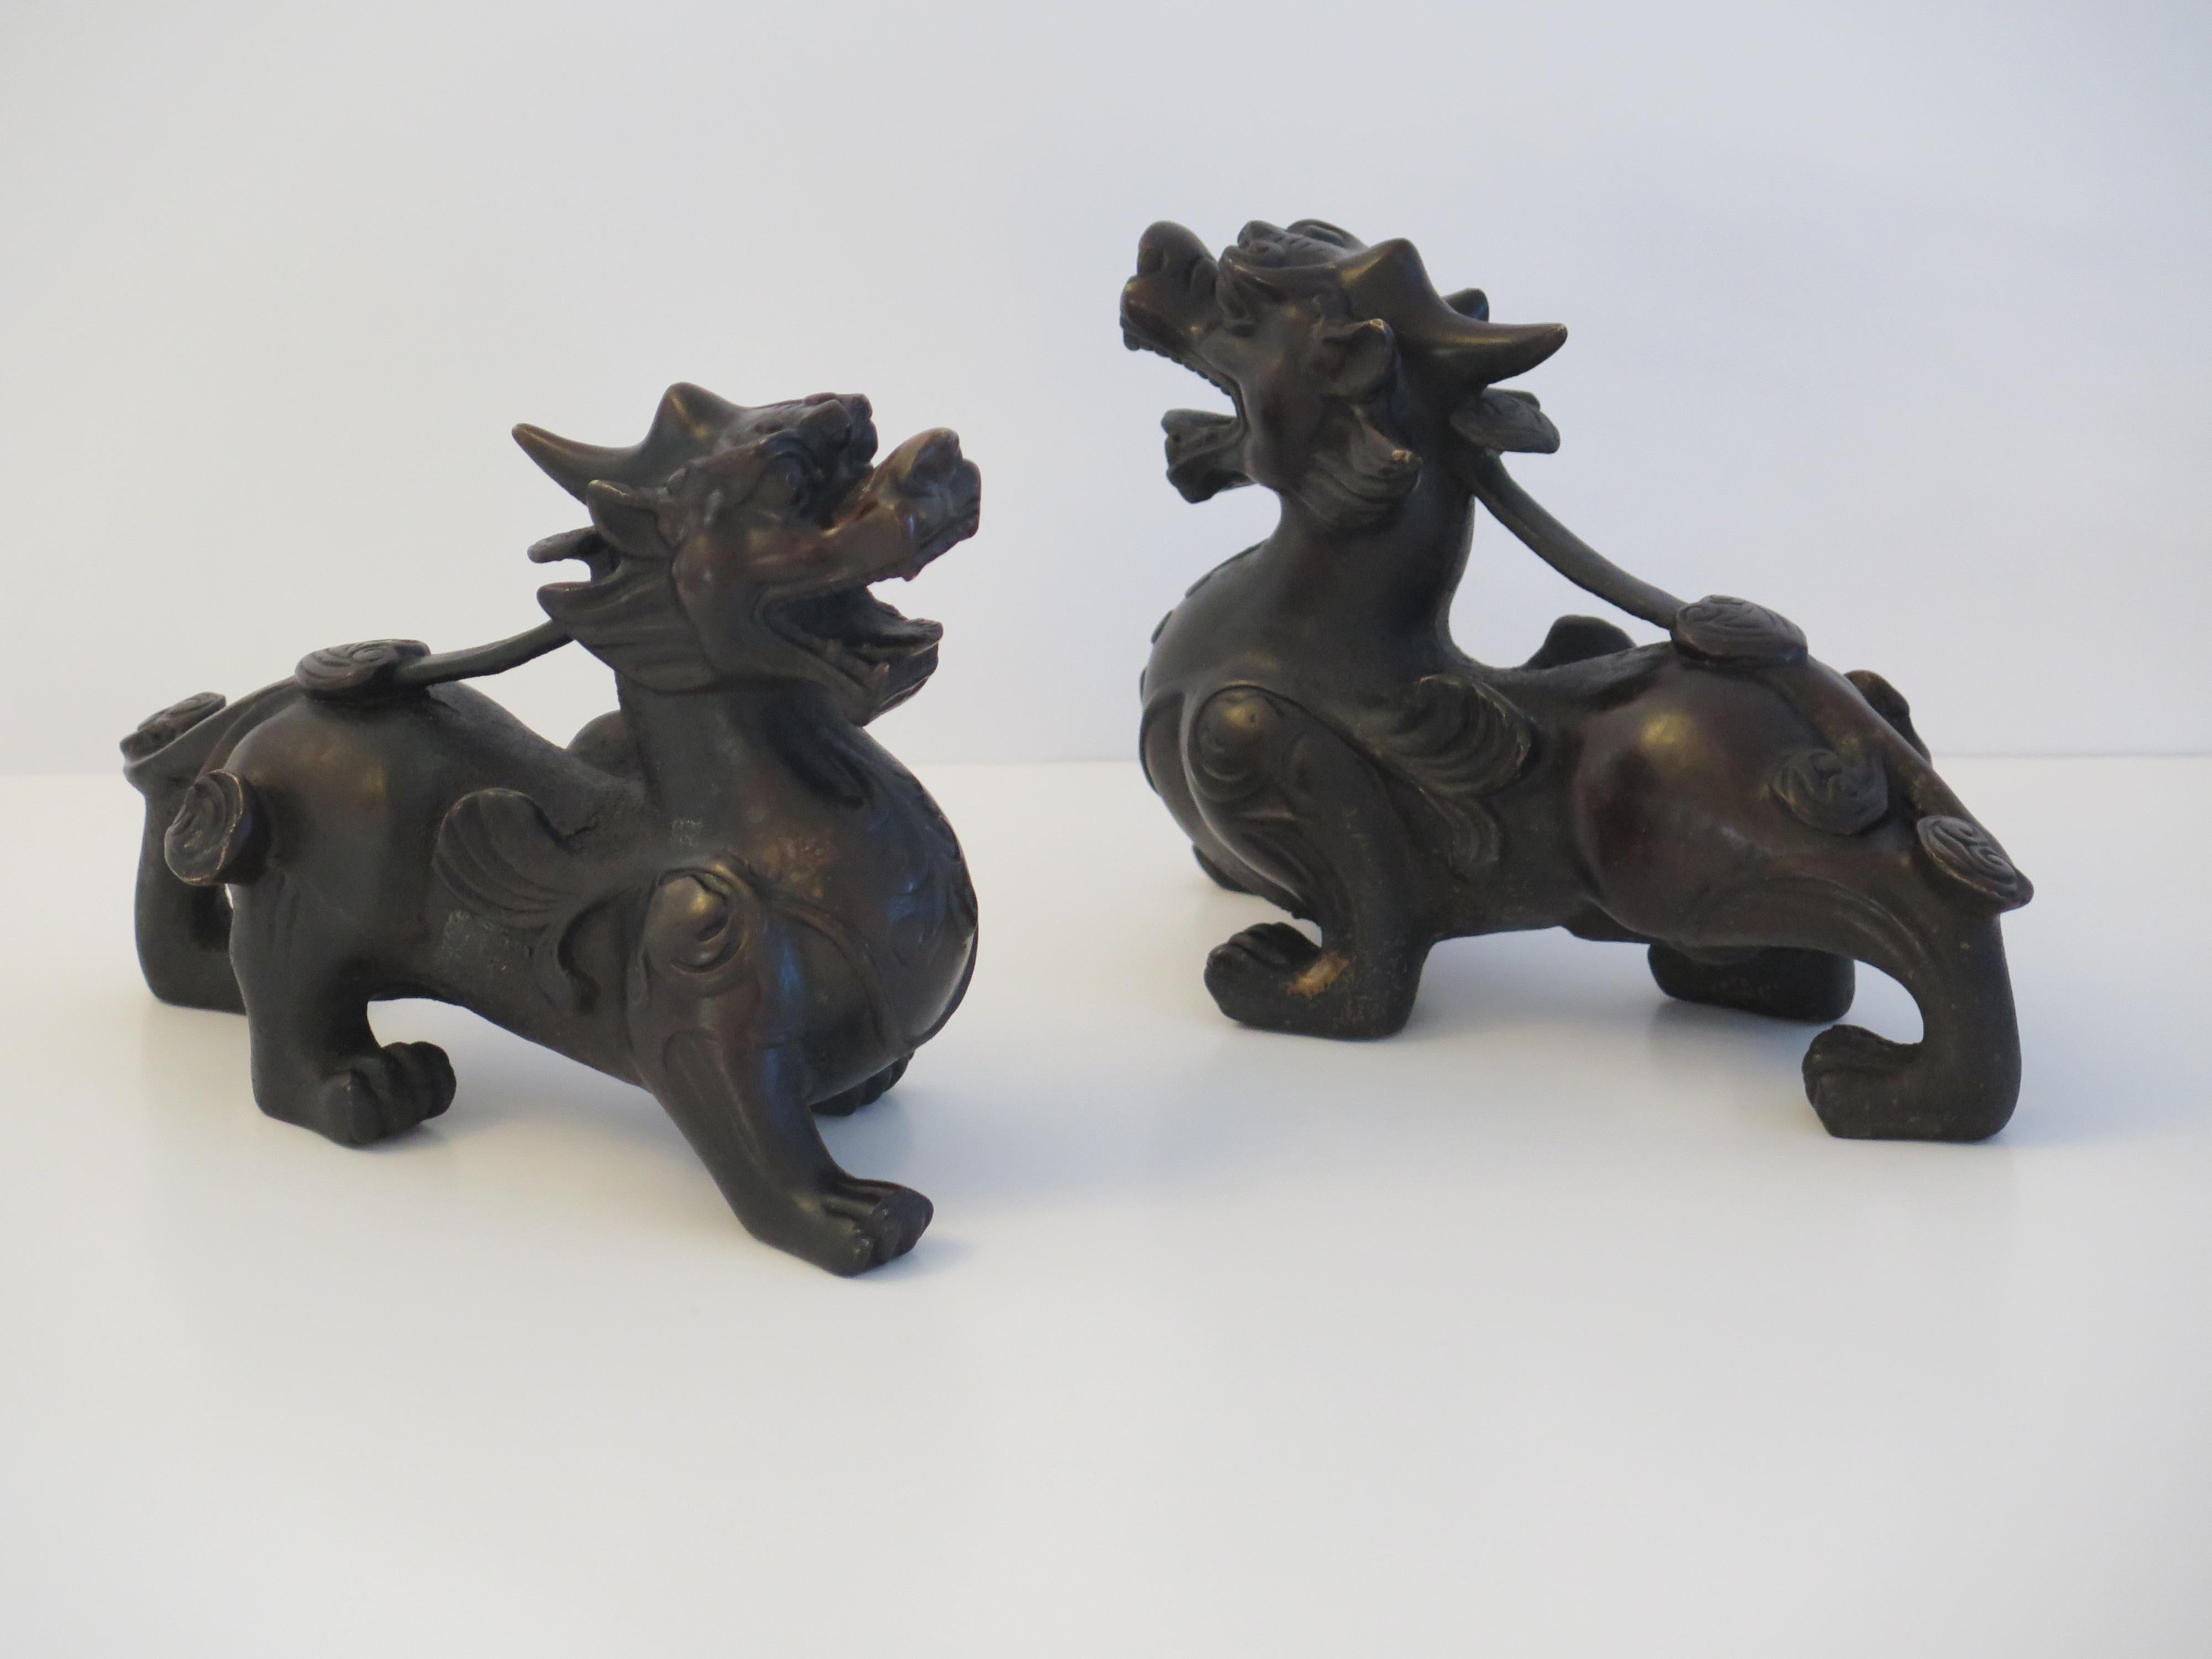 These are a very good pair of antique Chinese foo or lion dog sculptures, sometimes called temple lions, made of bronze, with good detail, which we date to the Qing dynasty, late 18th to early 19th Century.

These pieces are well cast with very good